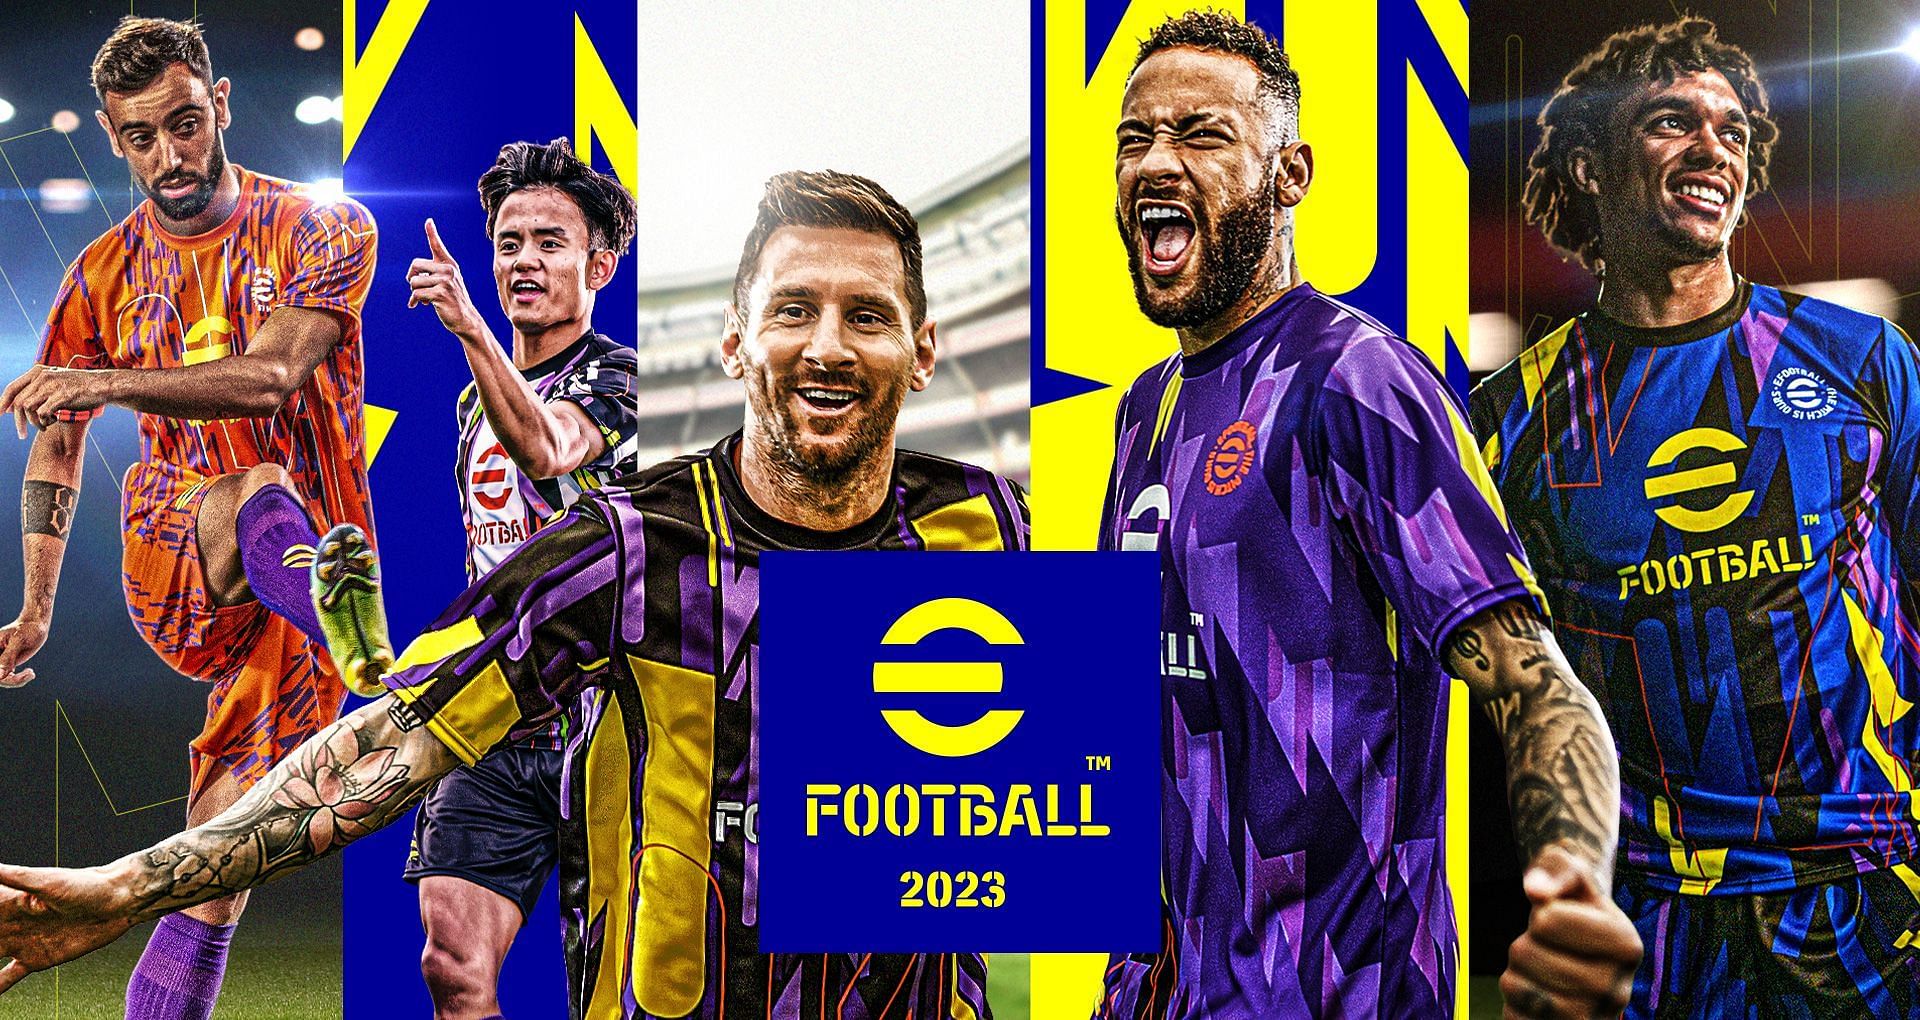 Winning in Dream Team mode will allow eFootball 2023 to build better squads and earn more rewards (Image via Konami)